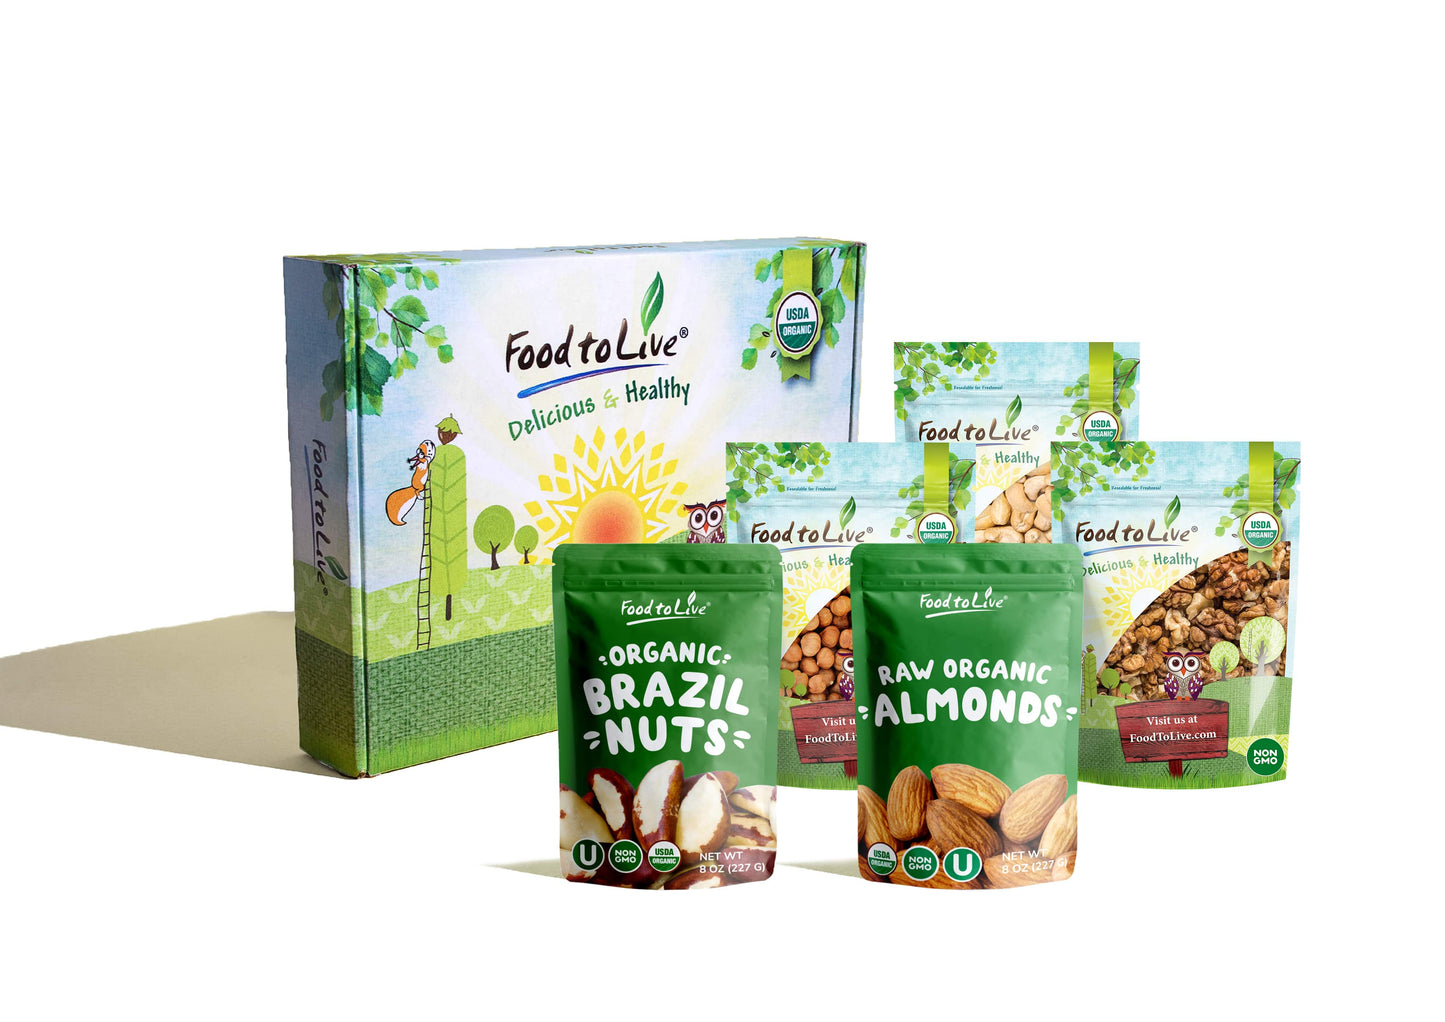 Organic Raw Nuts in a Gift Box - A Variety Pack of Almonds, Cashews, Brazil Nuts, Hazelnuts, and Walnuts - by Food to Live